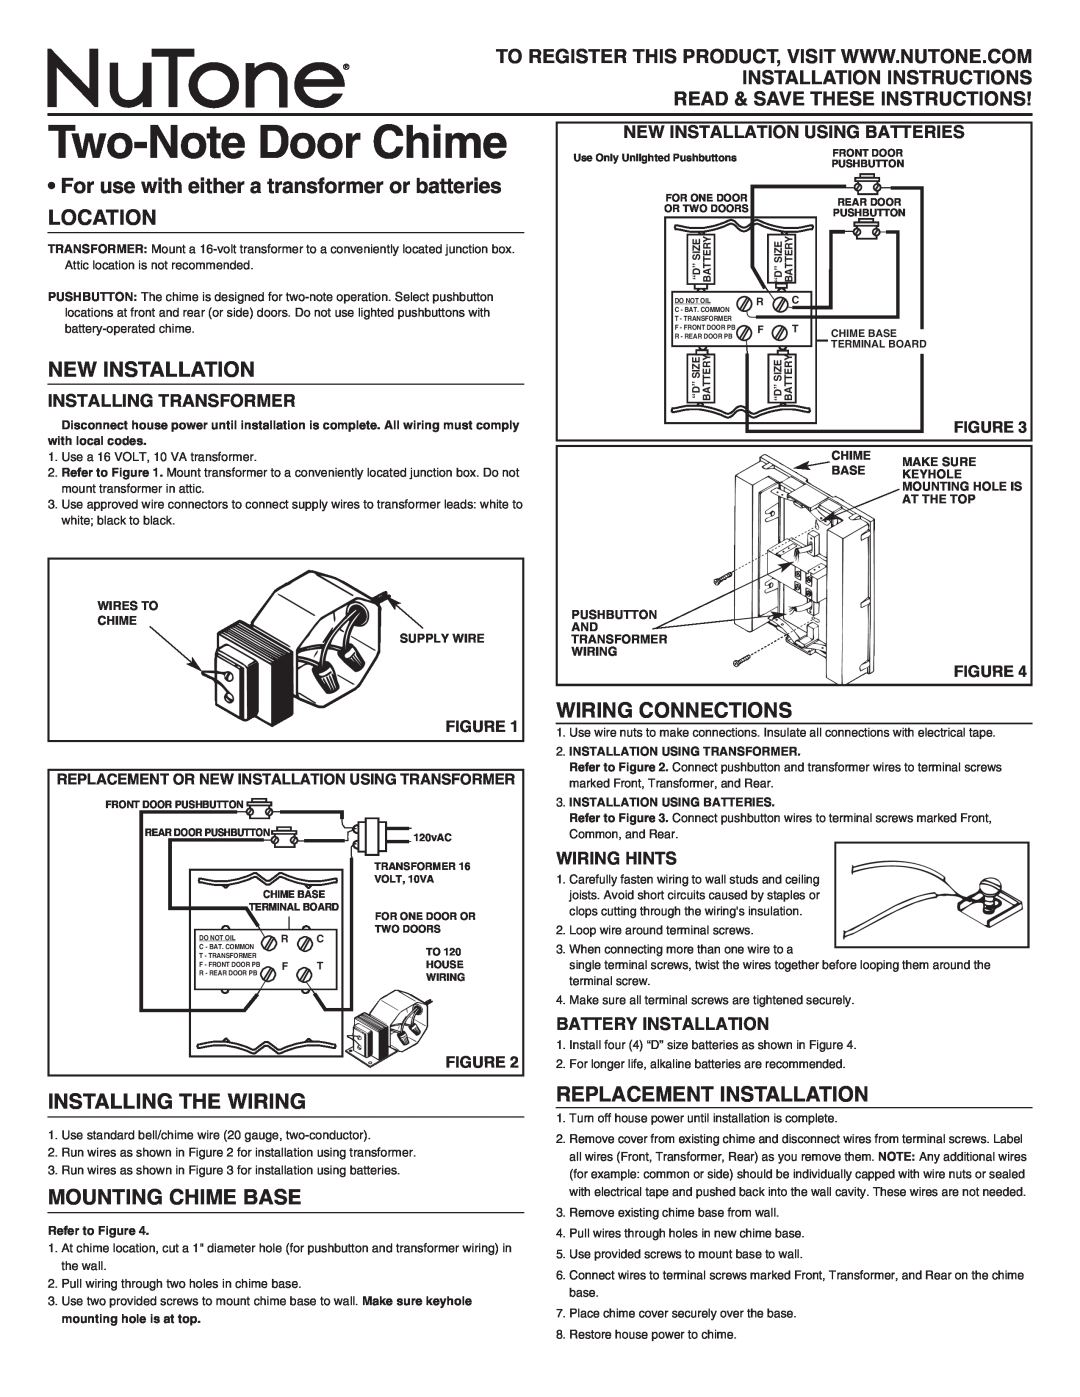 NuTone LA107WH installation instructions For use with either a transformer or batteries, Location, New Installation 